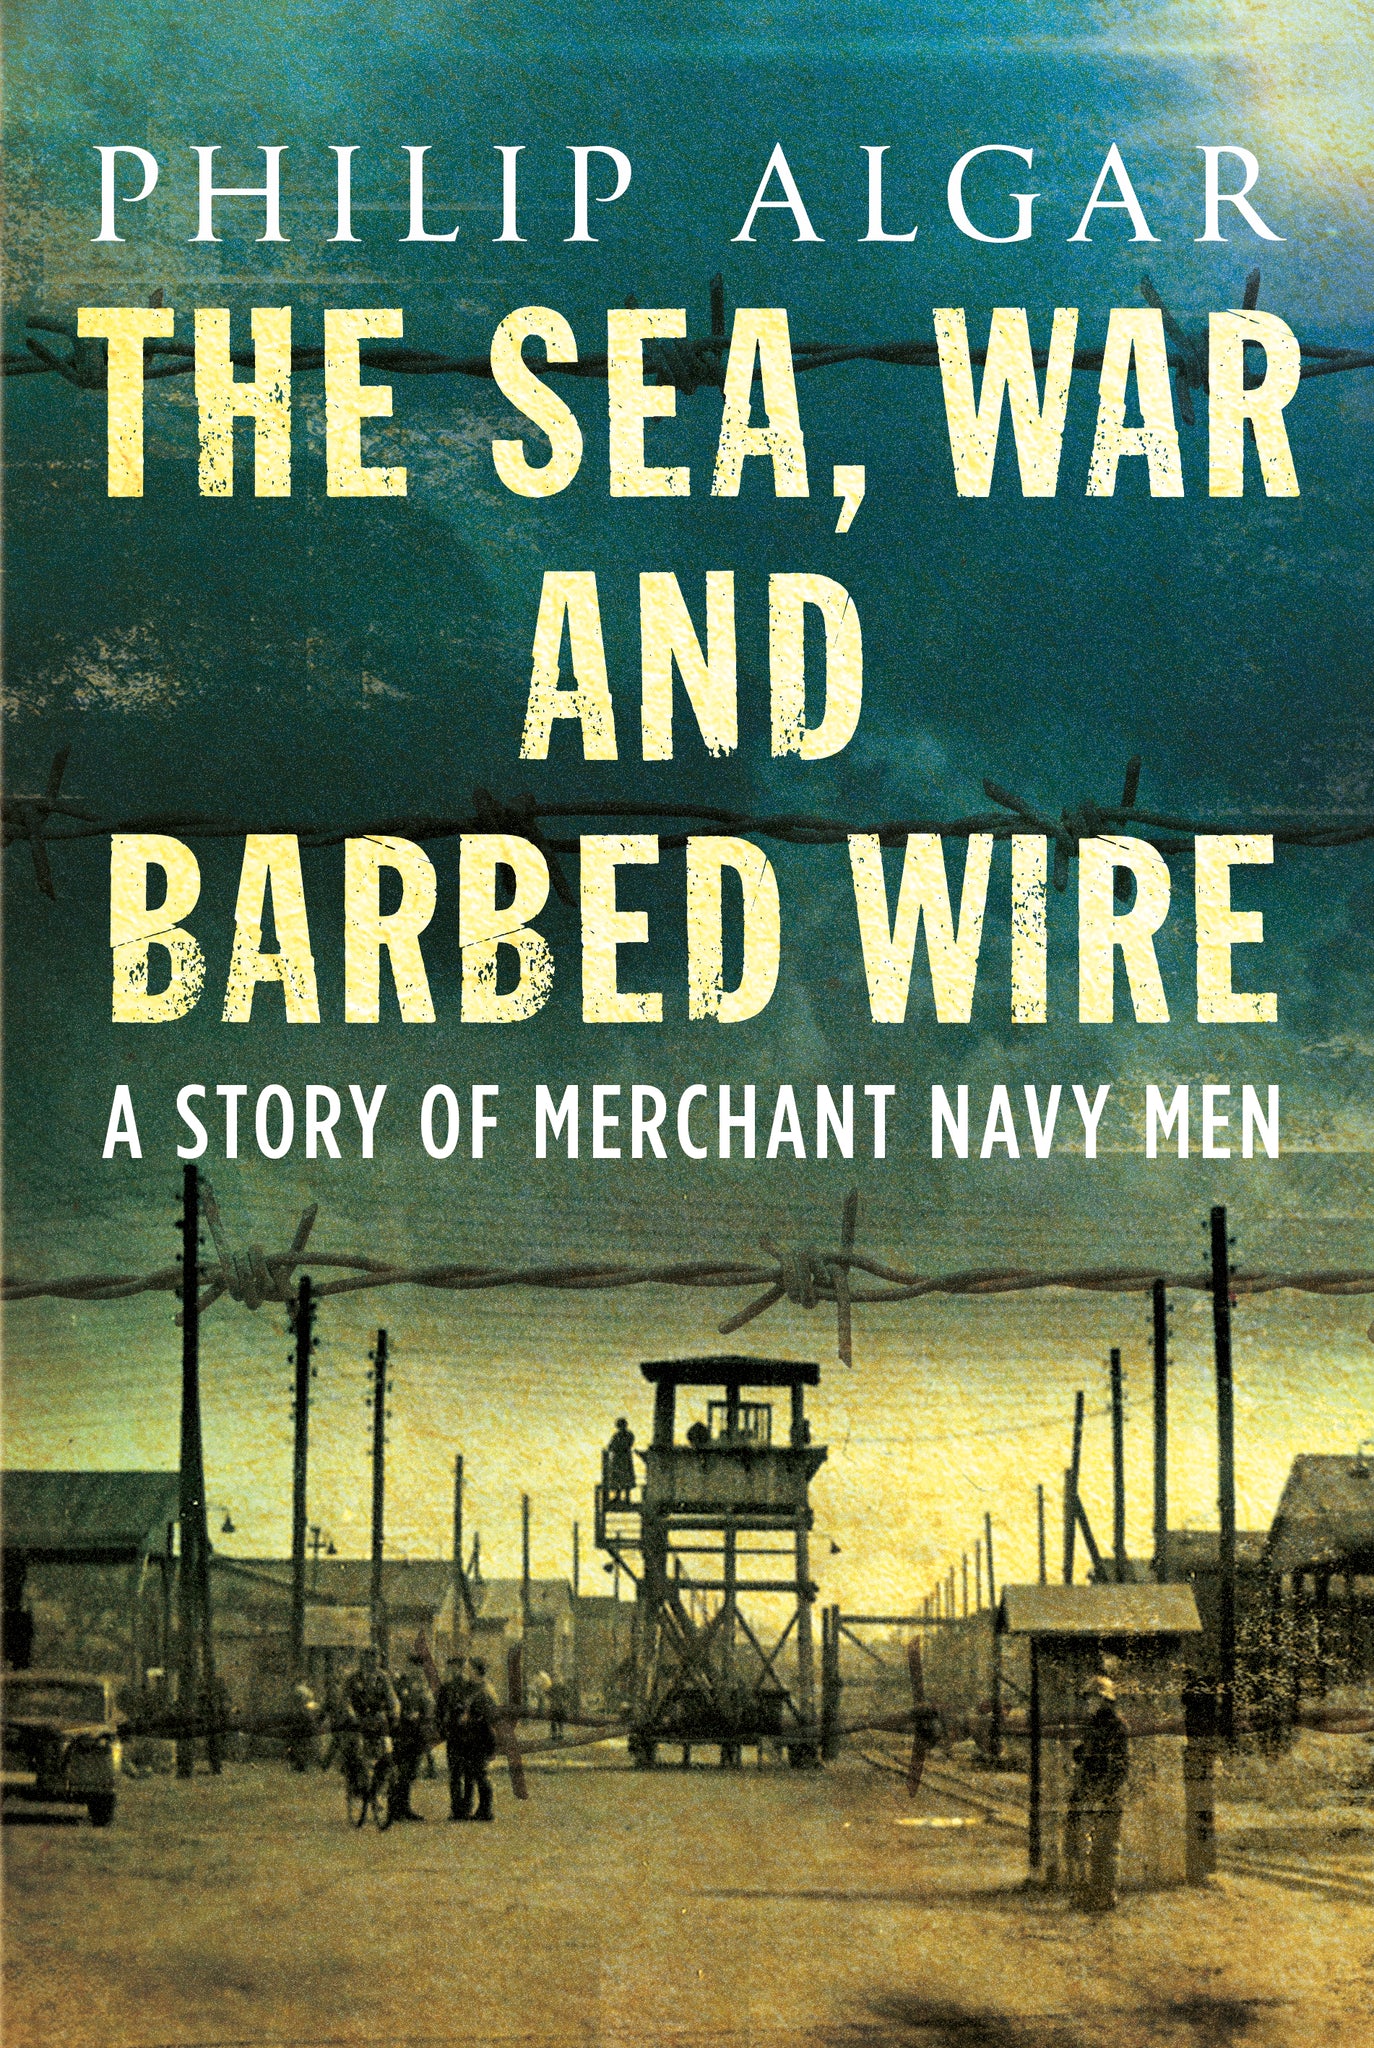 The Sea, War and Barbed Wire: A Story of Merchant Navy Men - available now from Fonthill Media